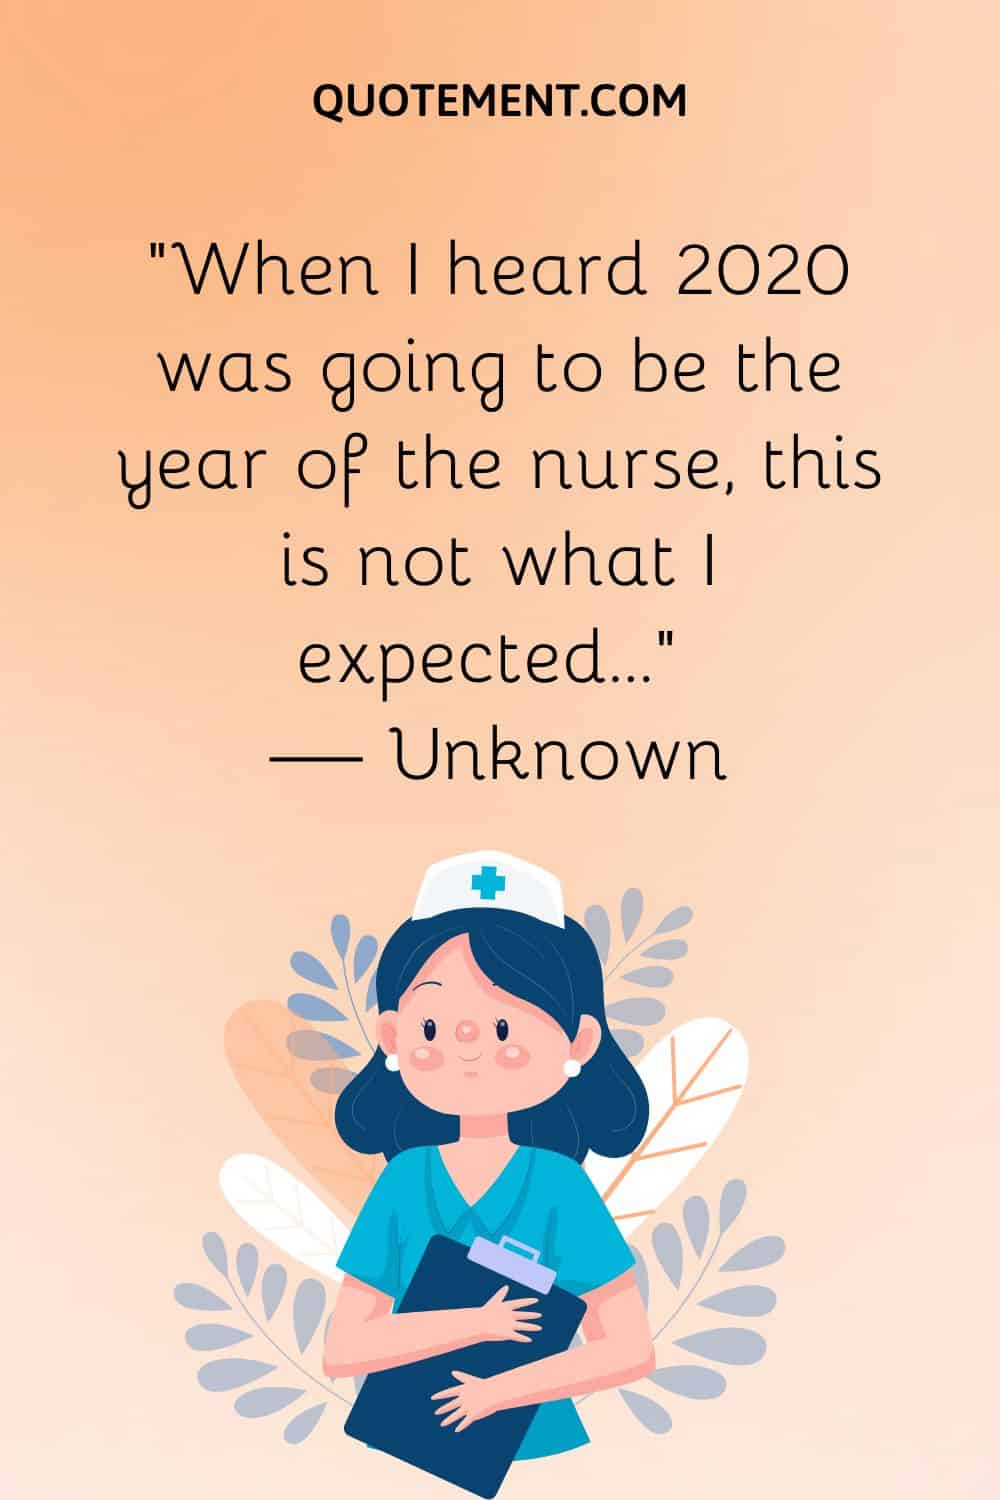 “When I heard 2020 was going to be the year of the nurse, this is not what I expected…” — Unknown